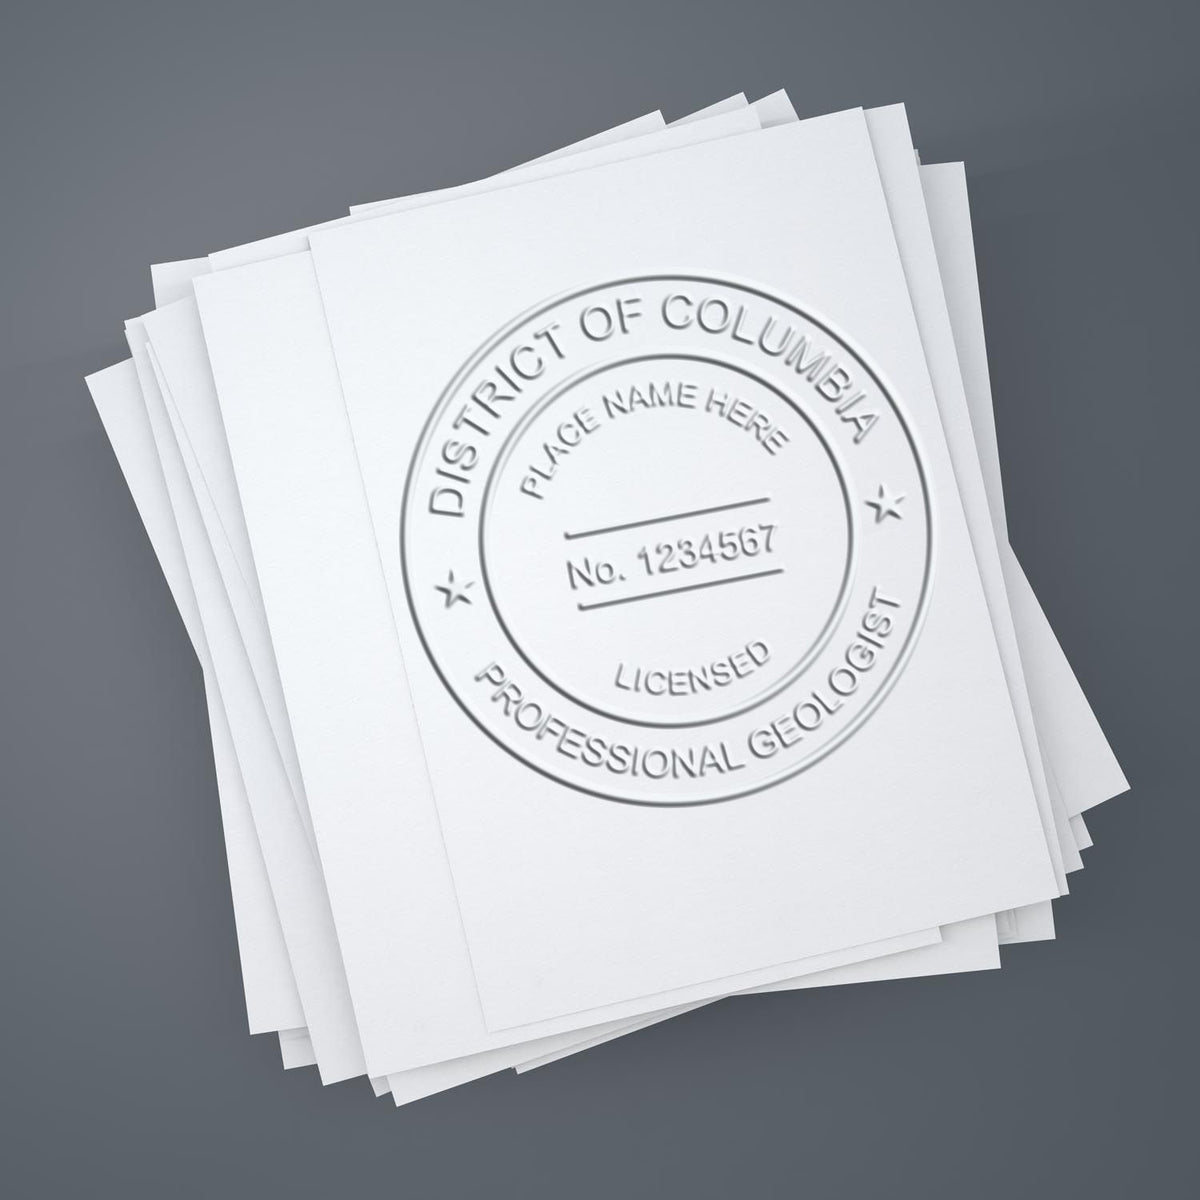 An in use photo of the Gift District of Columbia Geologist Seal showing a sample imprint on a cardstock